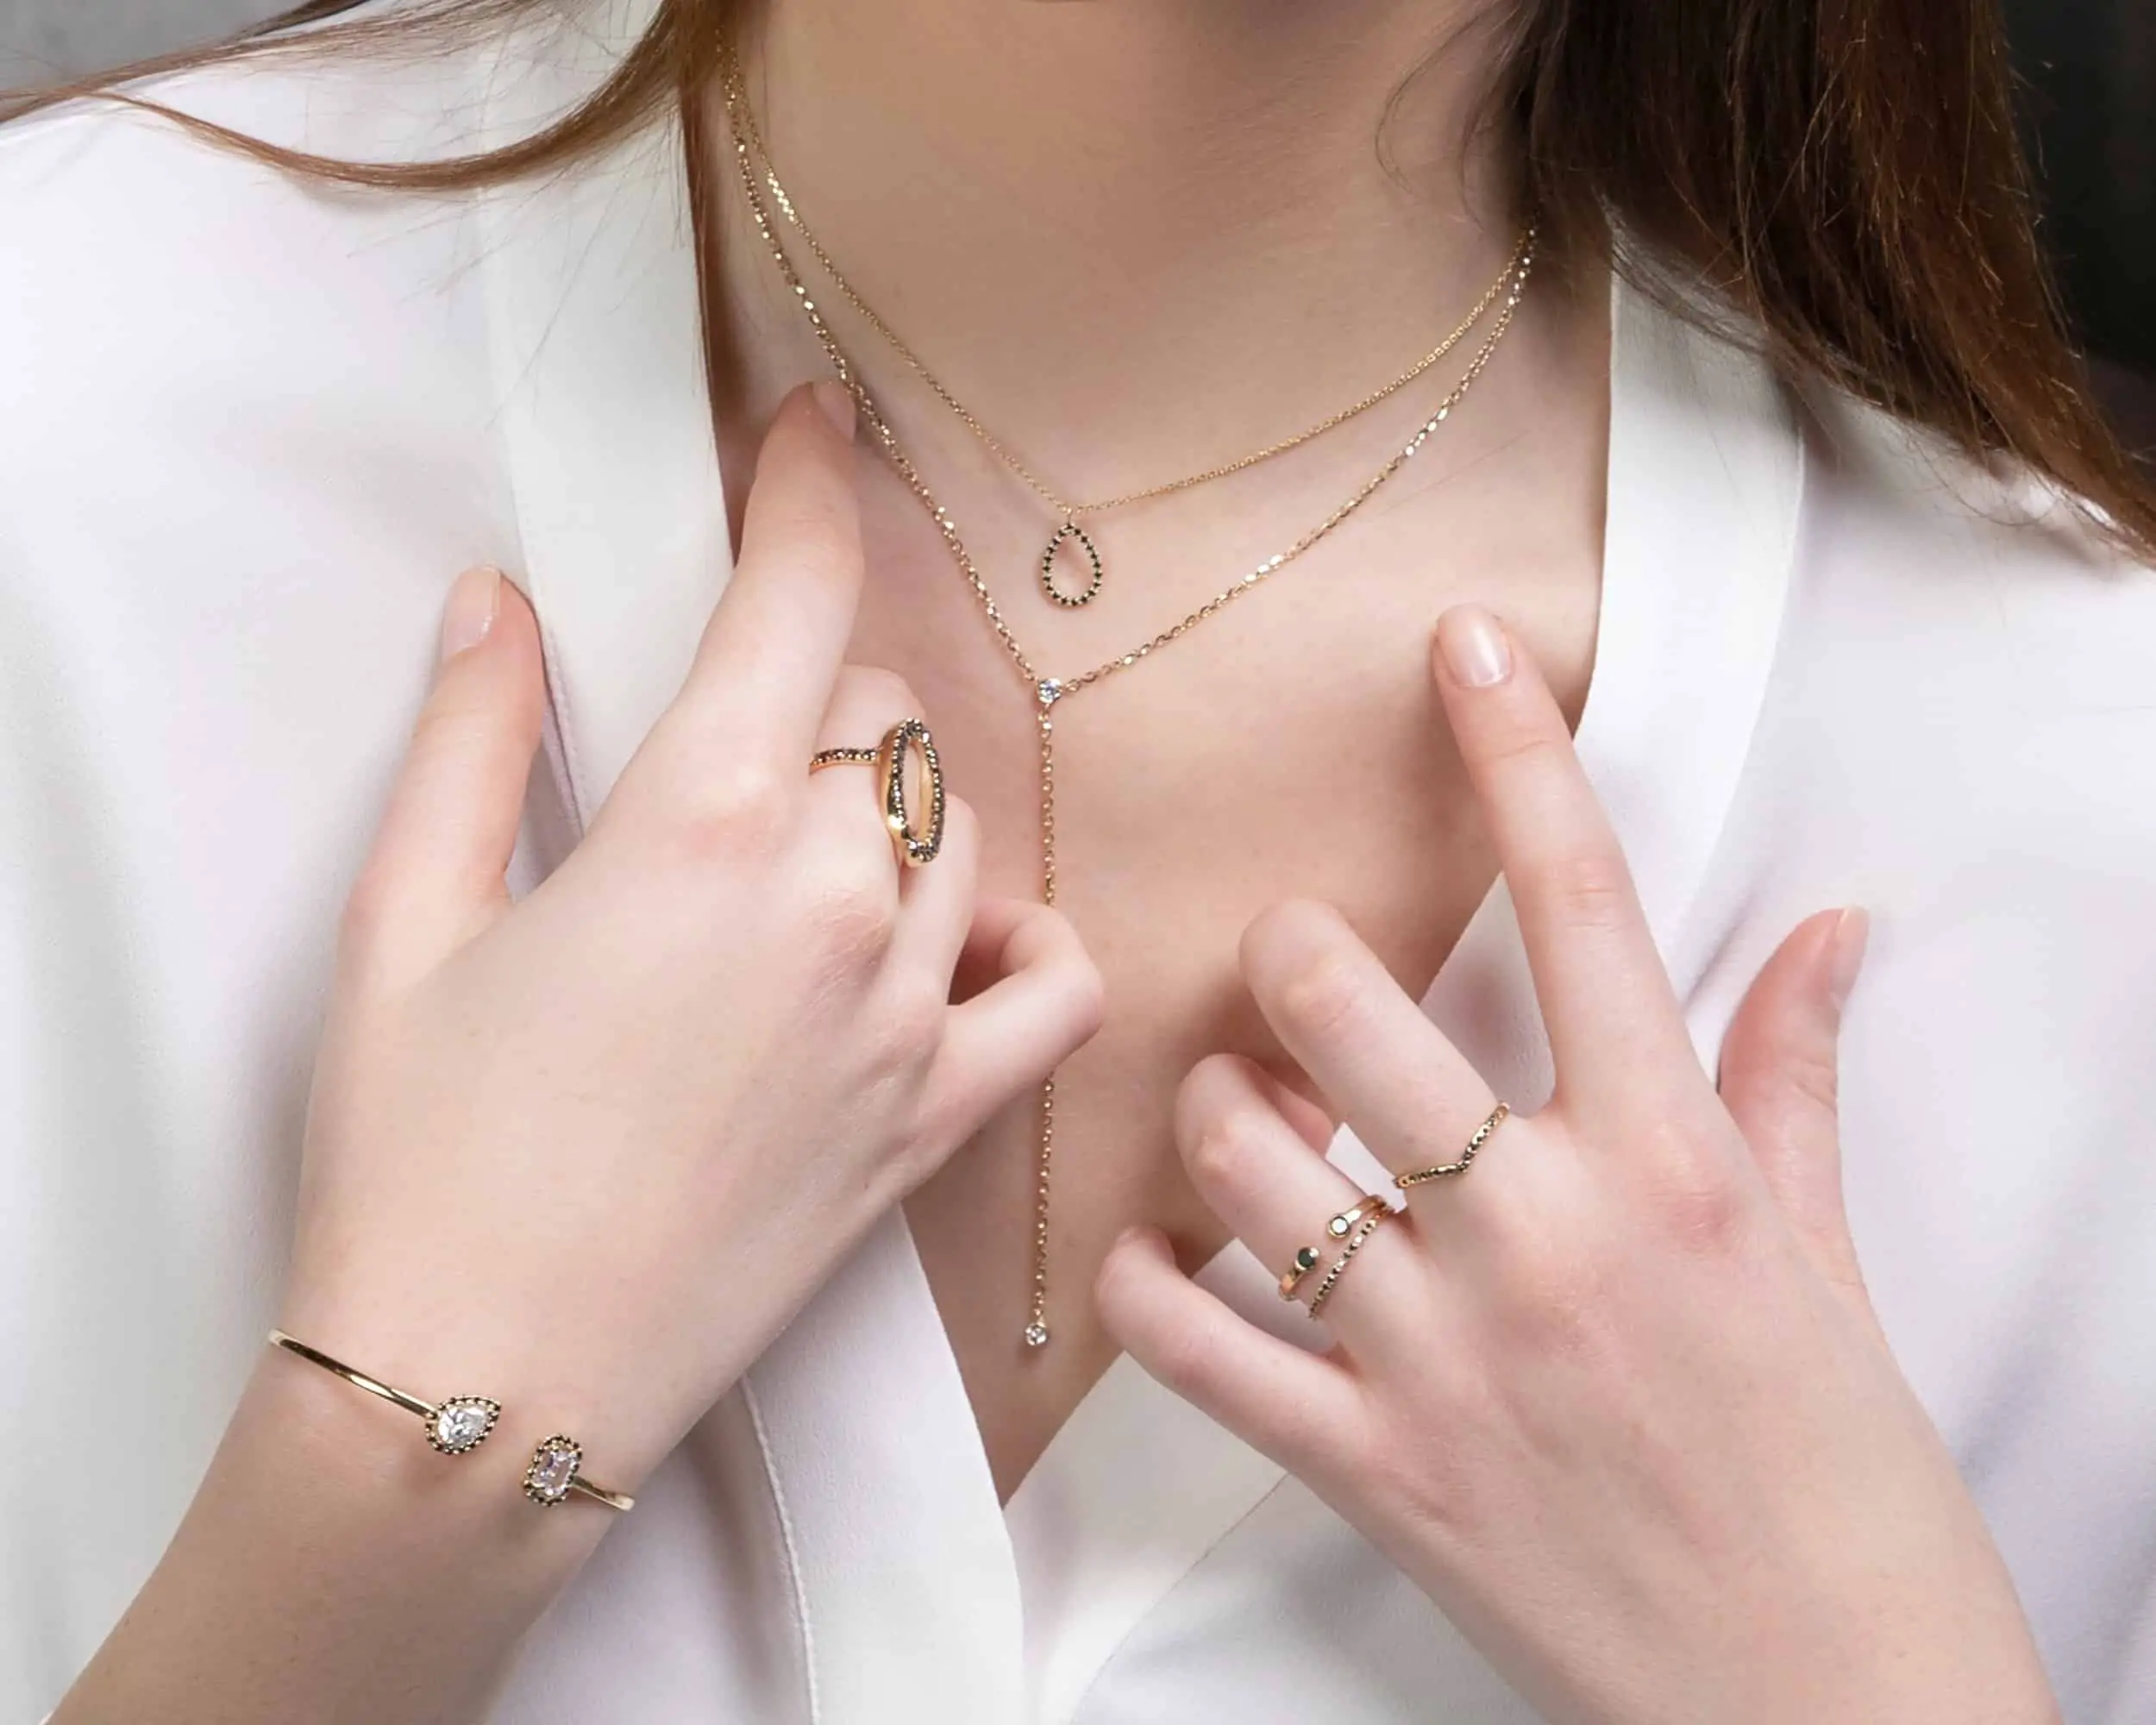 5 Ways To Upgrade Your Jewelry: An Essential Guide